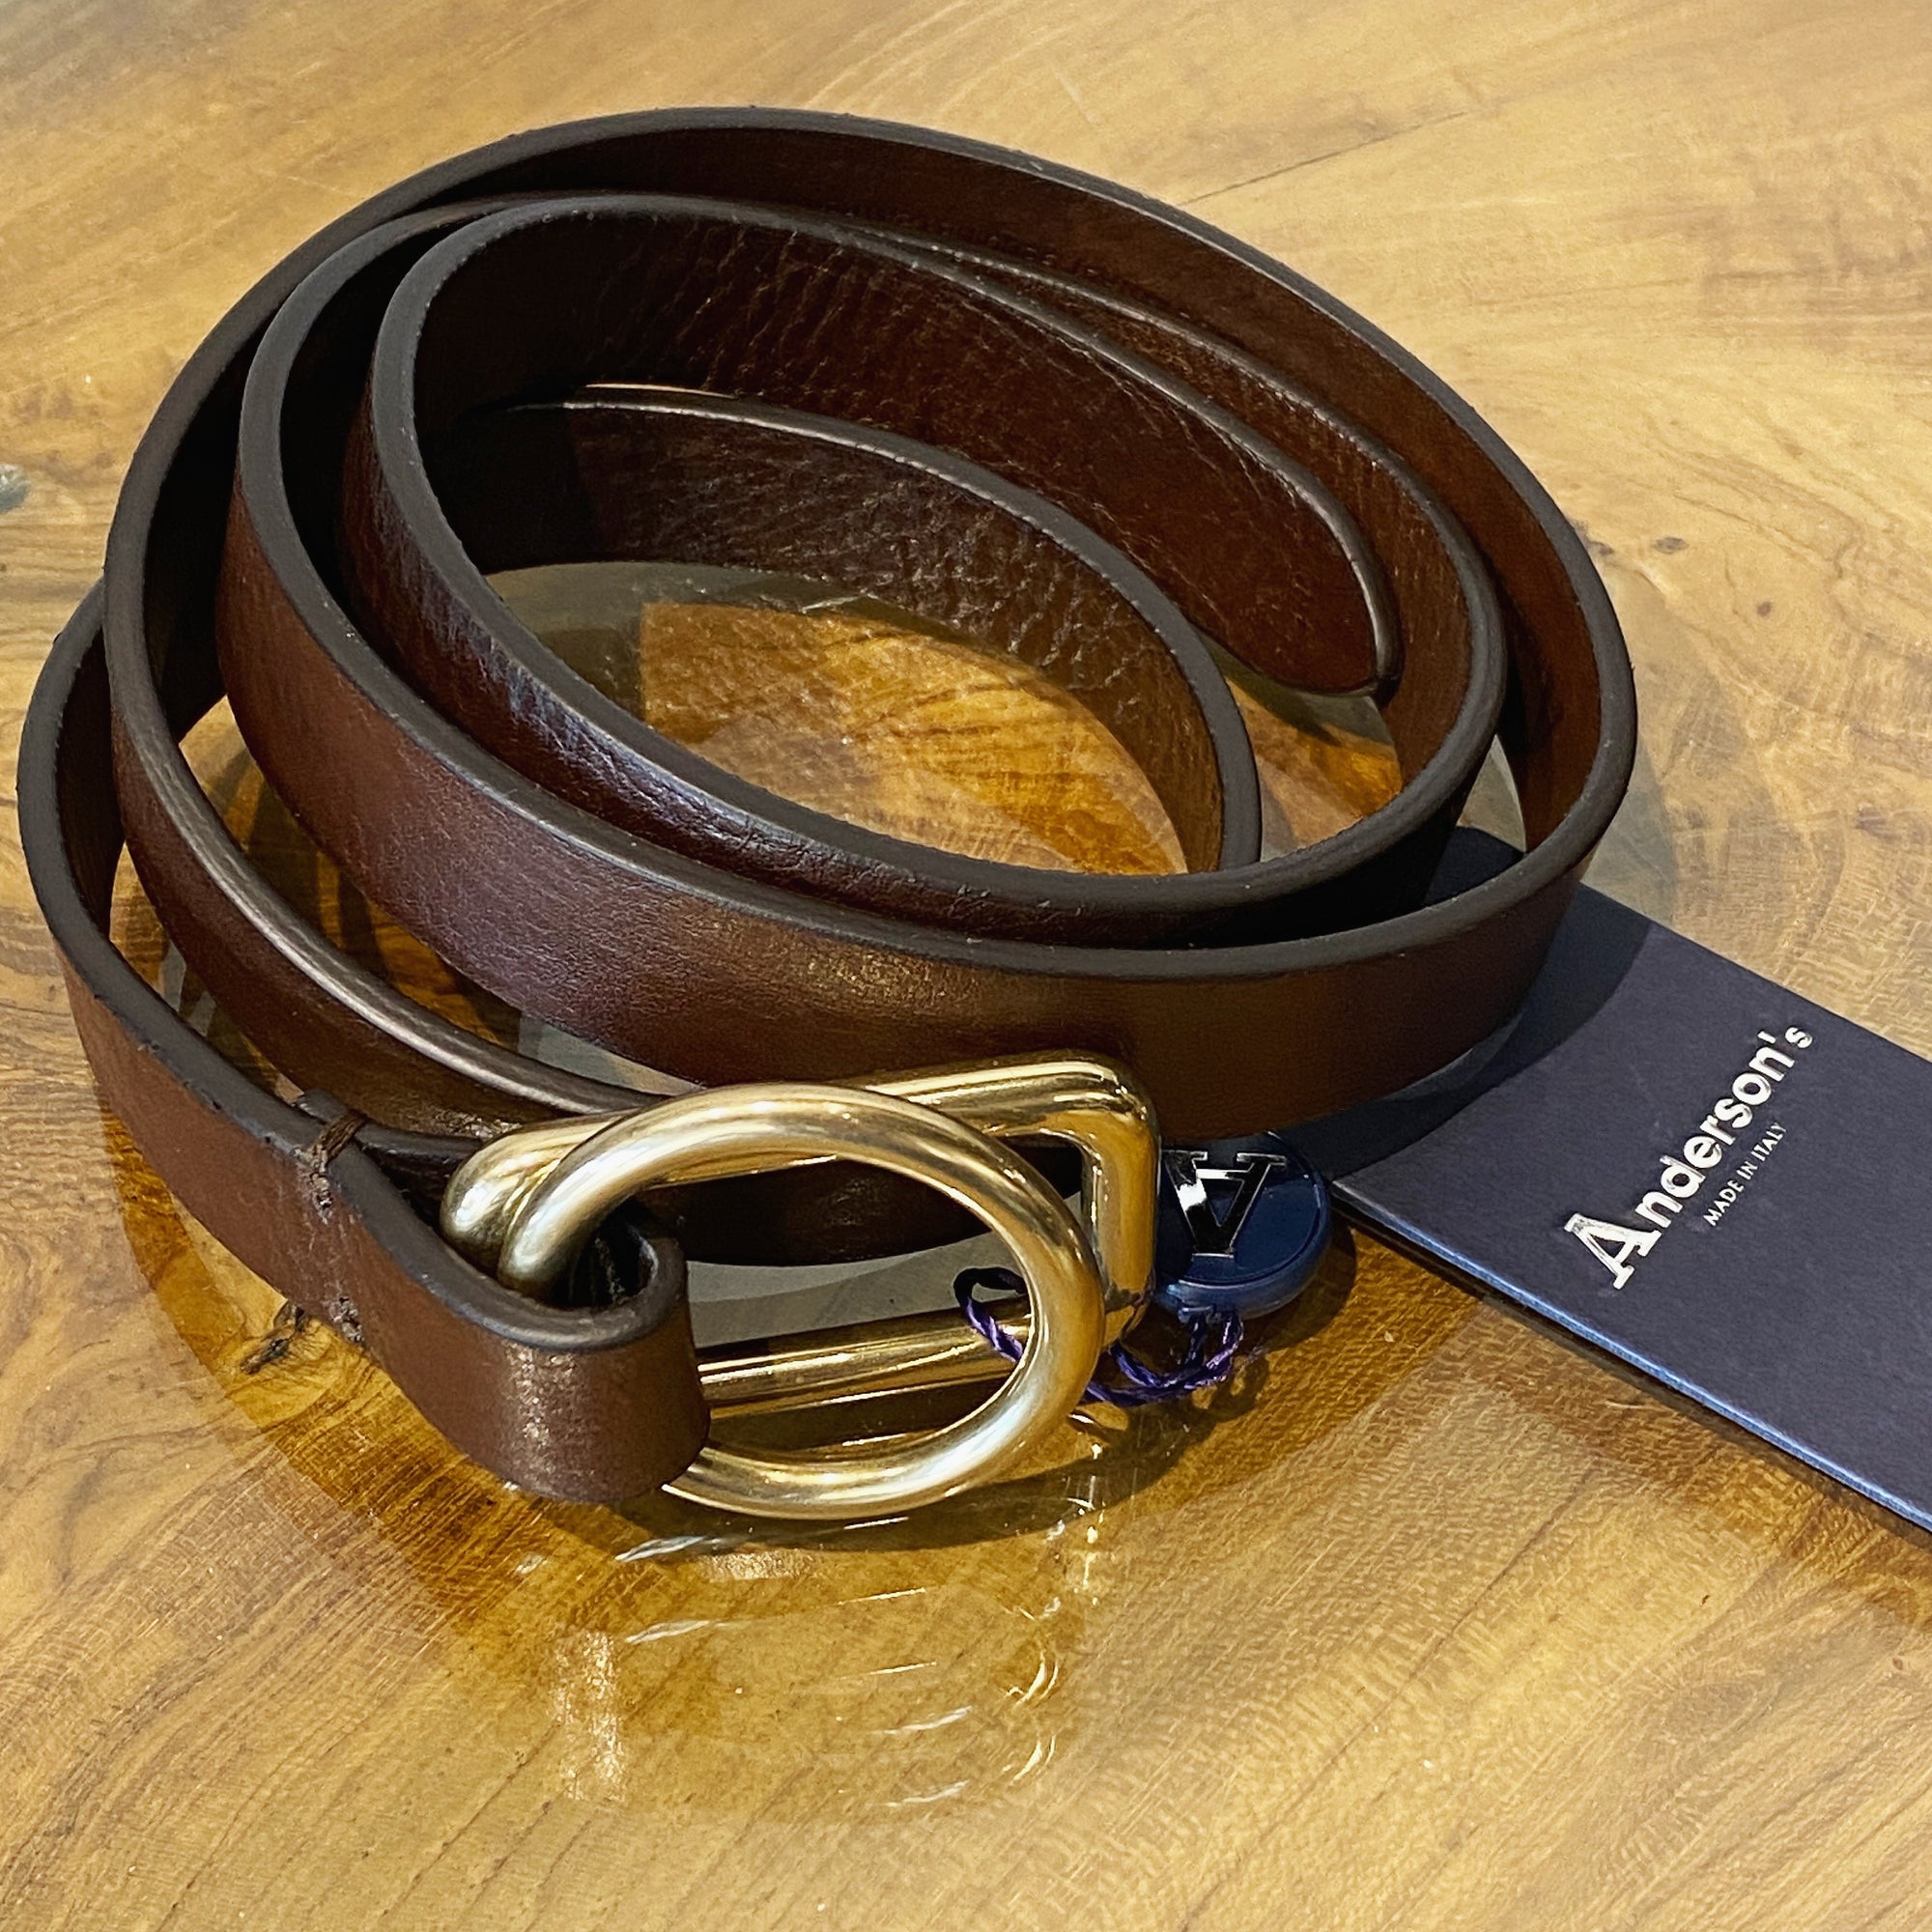 Anderson's Women's Belt - Project Clothing